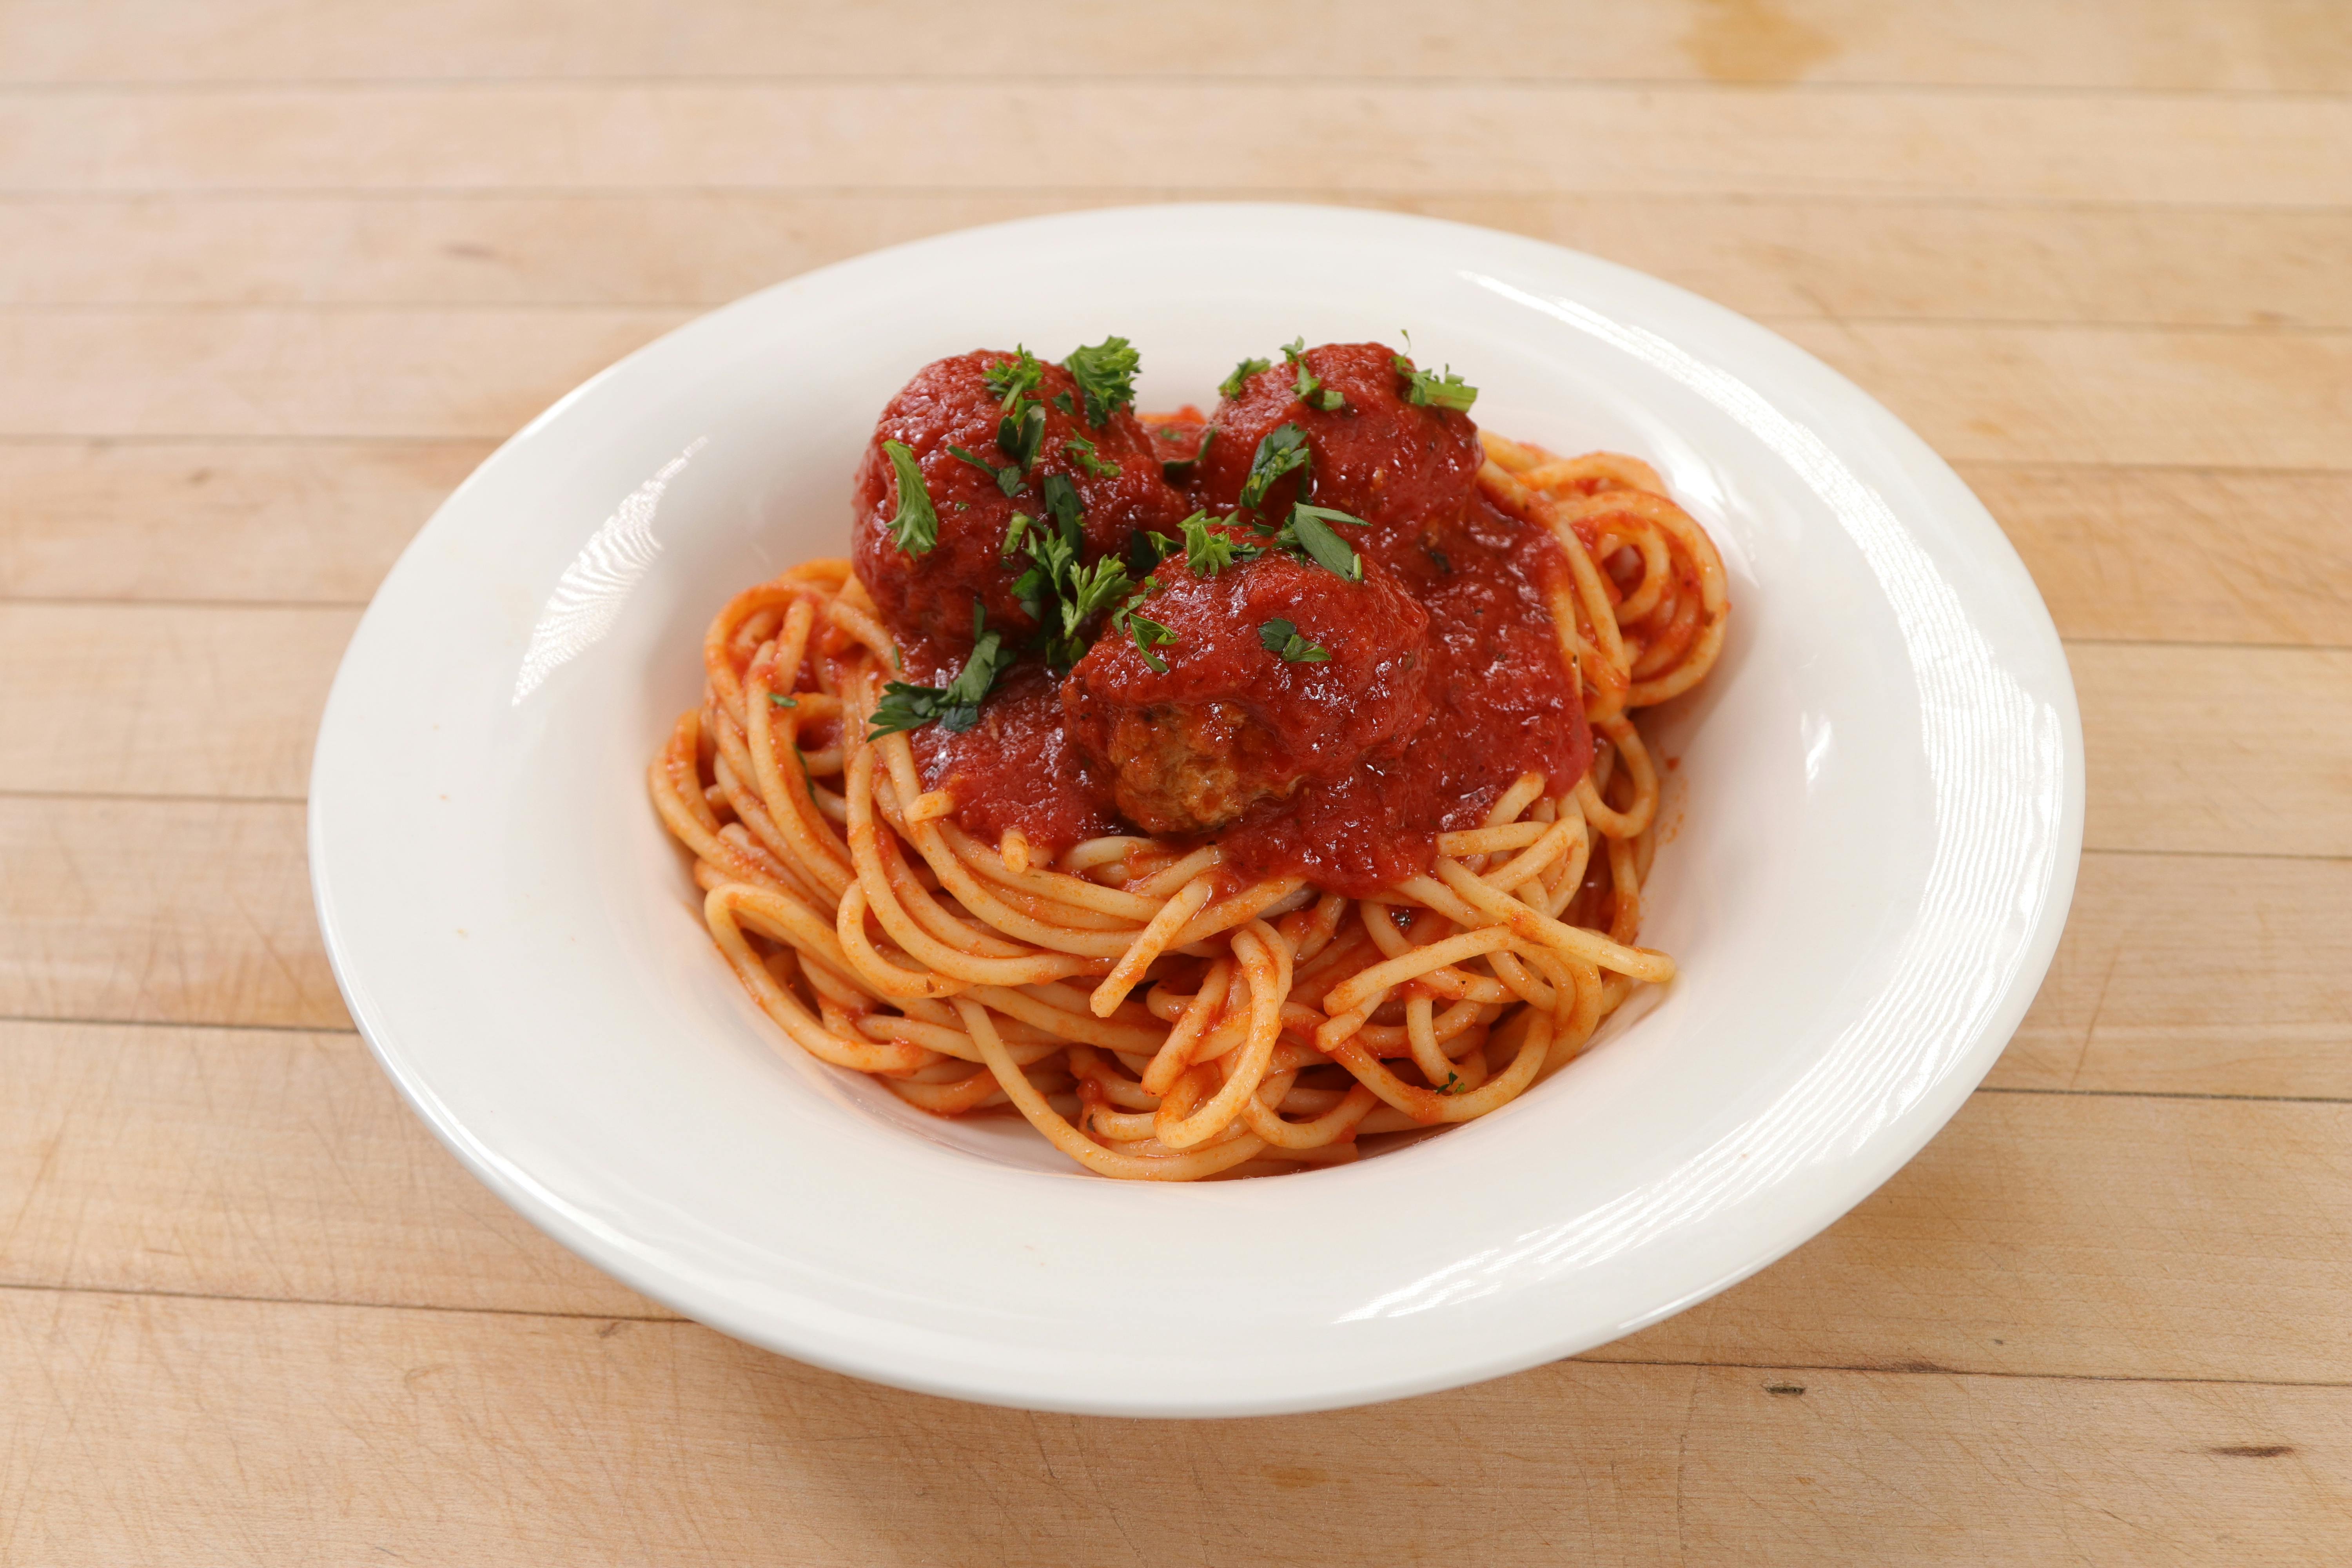 Spaghetti with Meatball from Aroma Pizza & Pasta in Lake Forest, CA